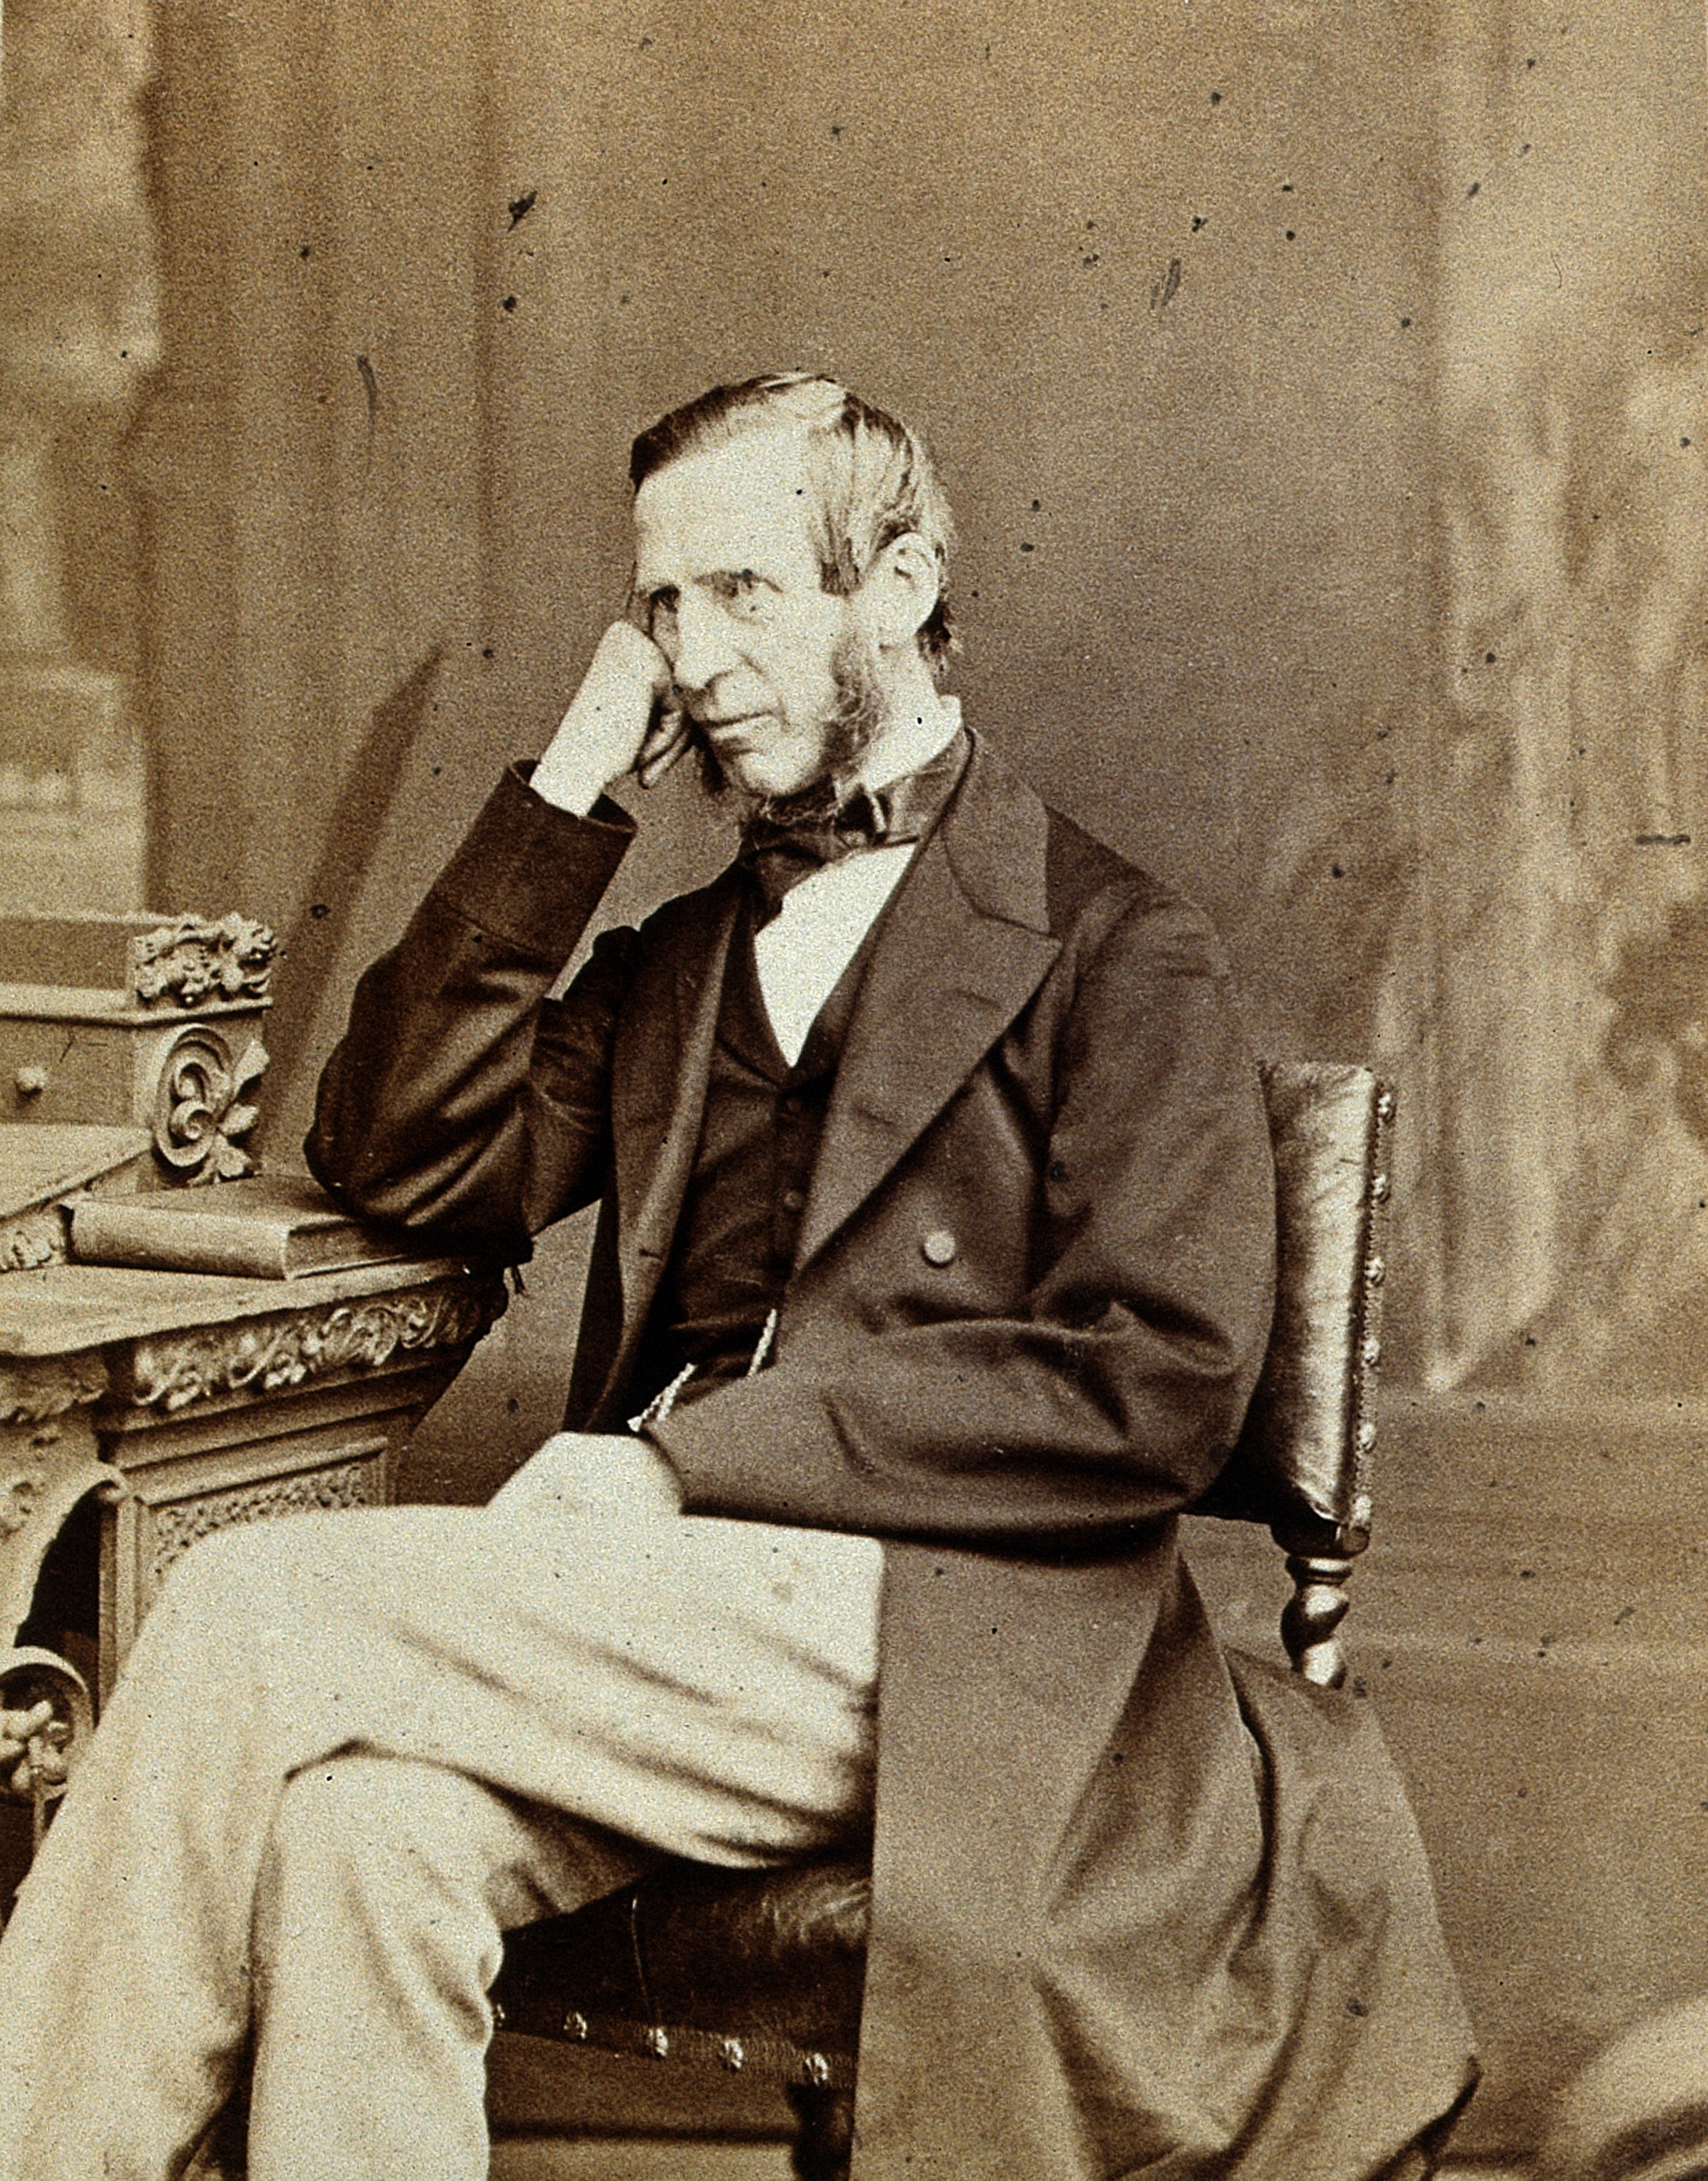 Sir George Edward Paget. Photograph by Ernest Edwards, 1867. Wellcome V0028405